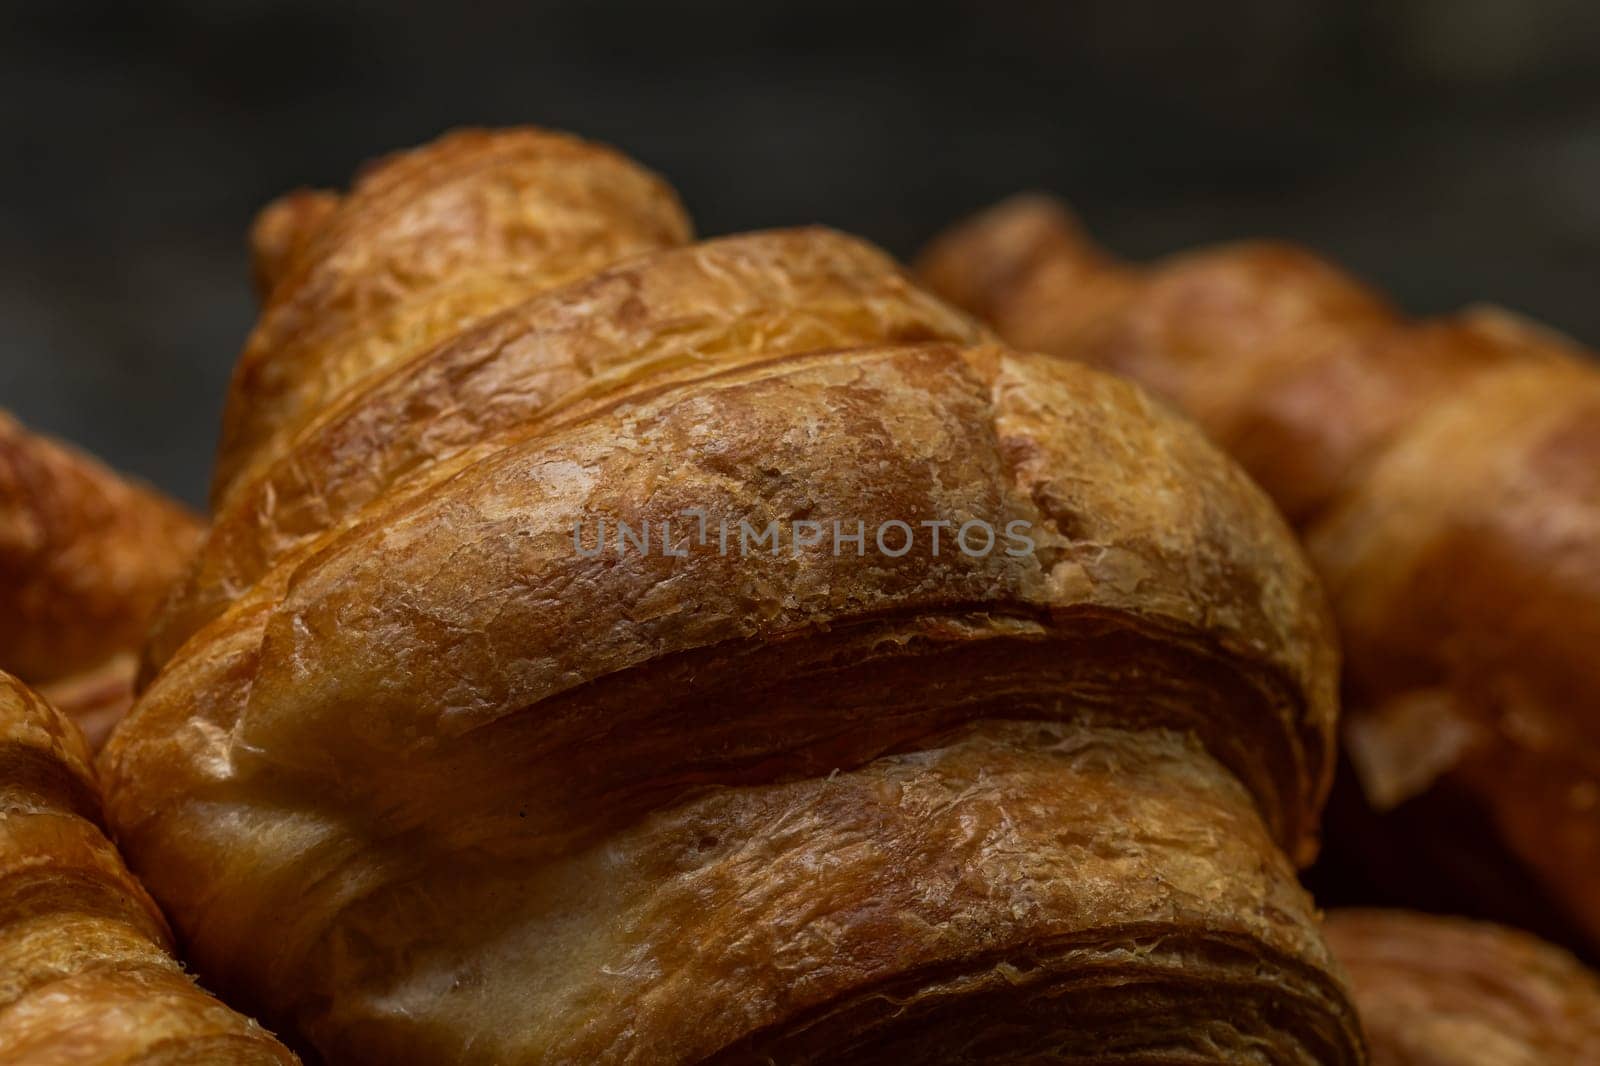 Freshly baked golden brown French croissants. Tasty baked croissants, warm buttery croissants and baked pastries by vladispas